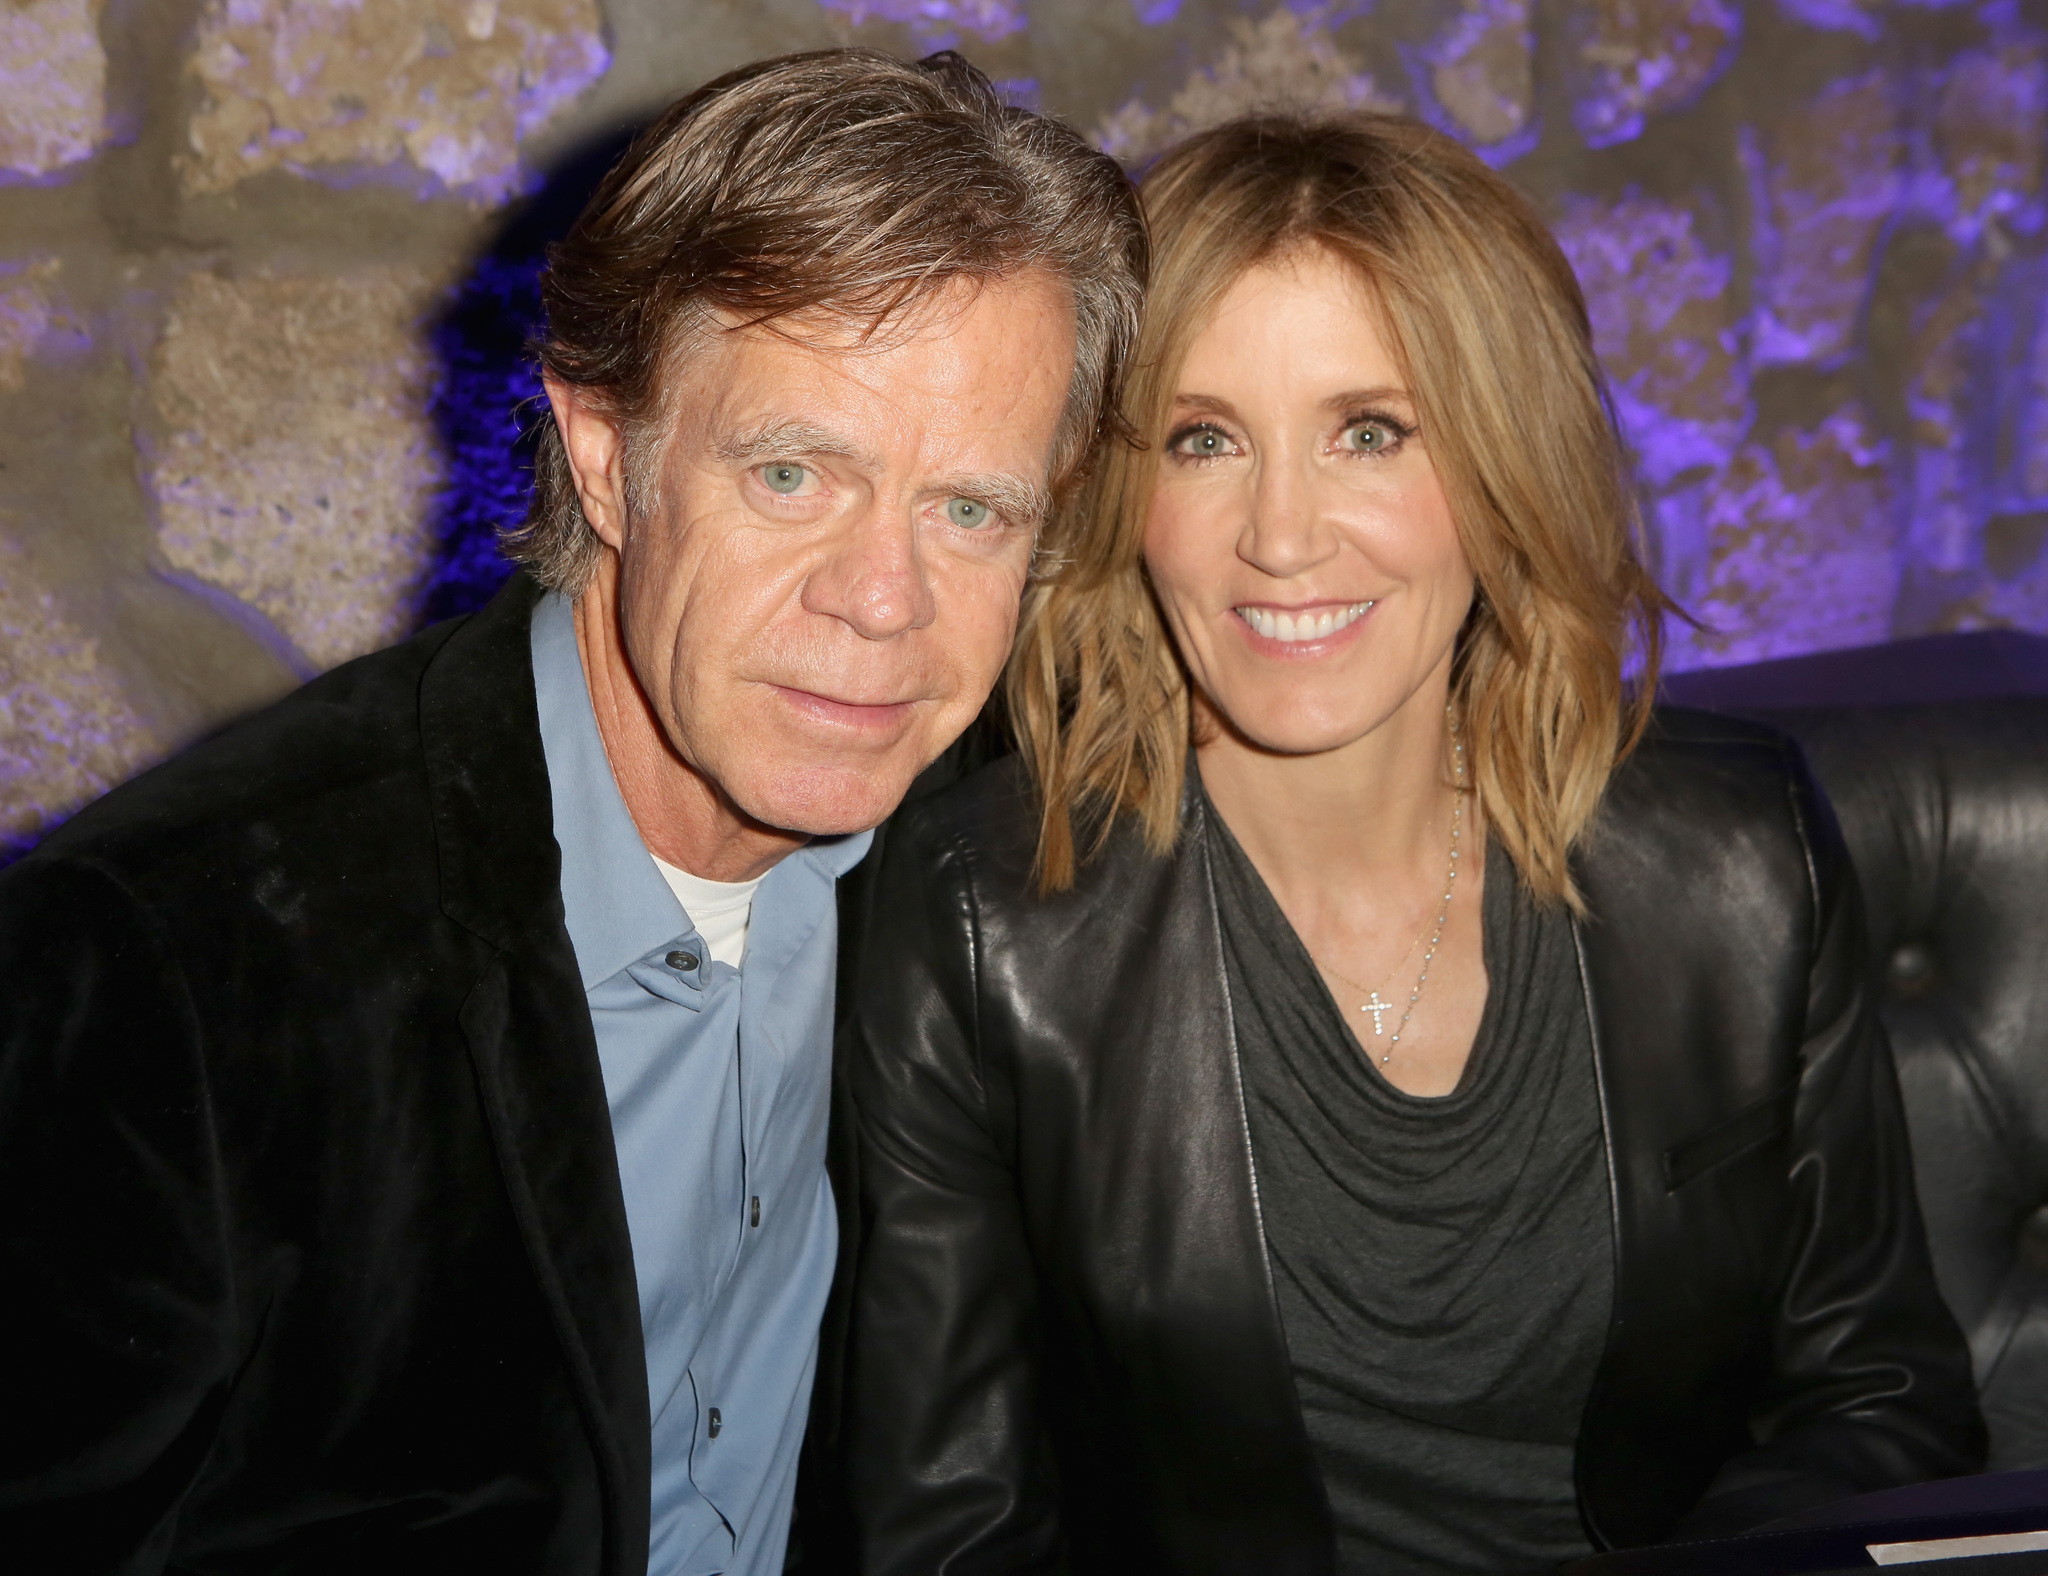 William H. Macy and Felicity Huffman at event of Pyragas (2014)